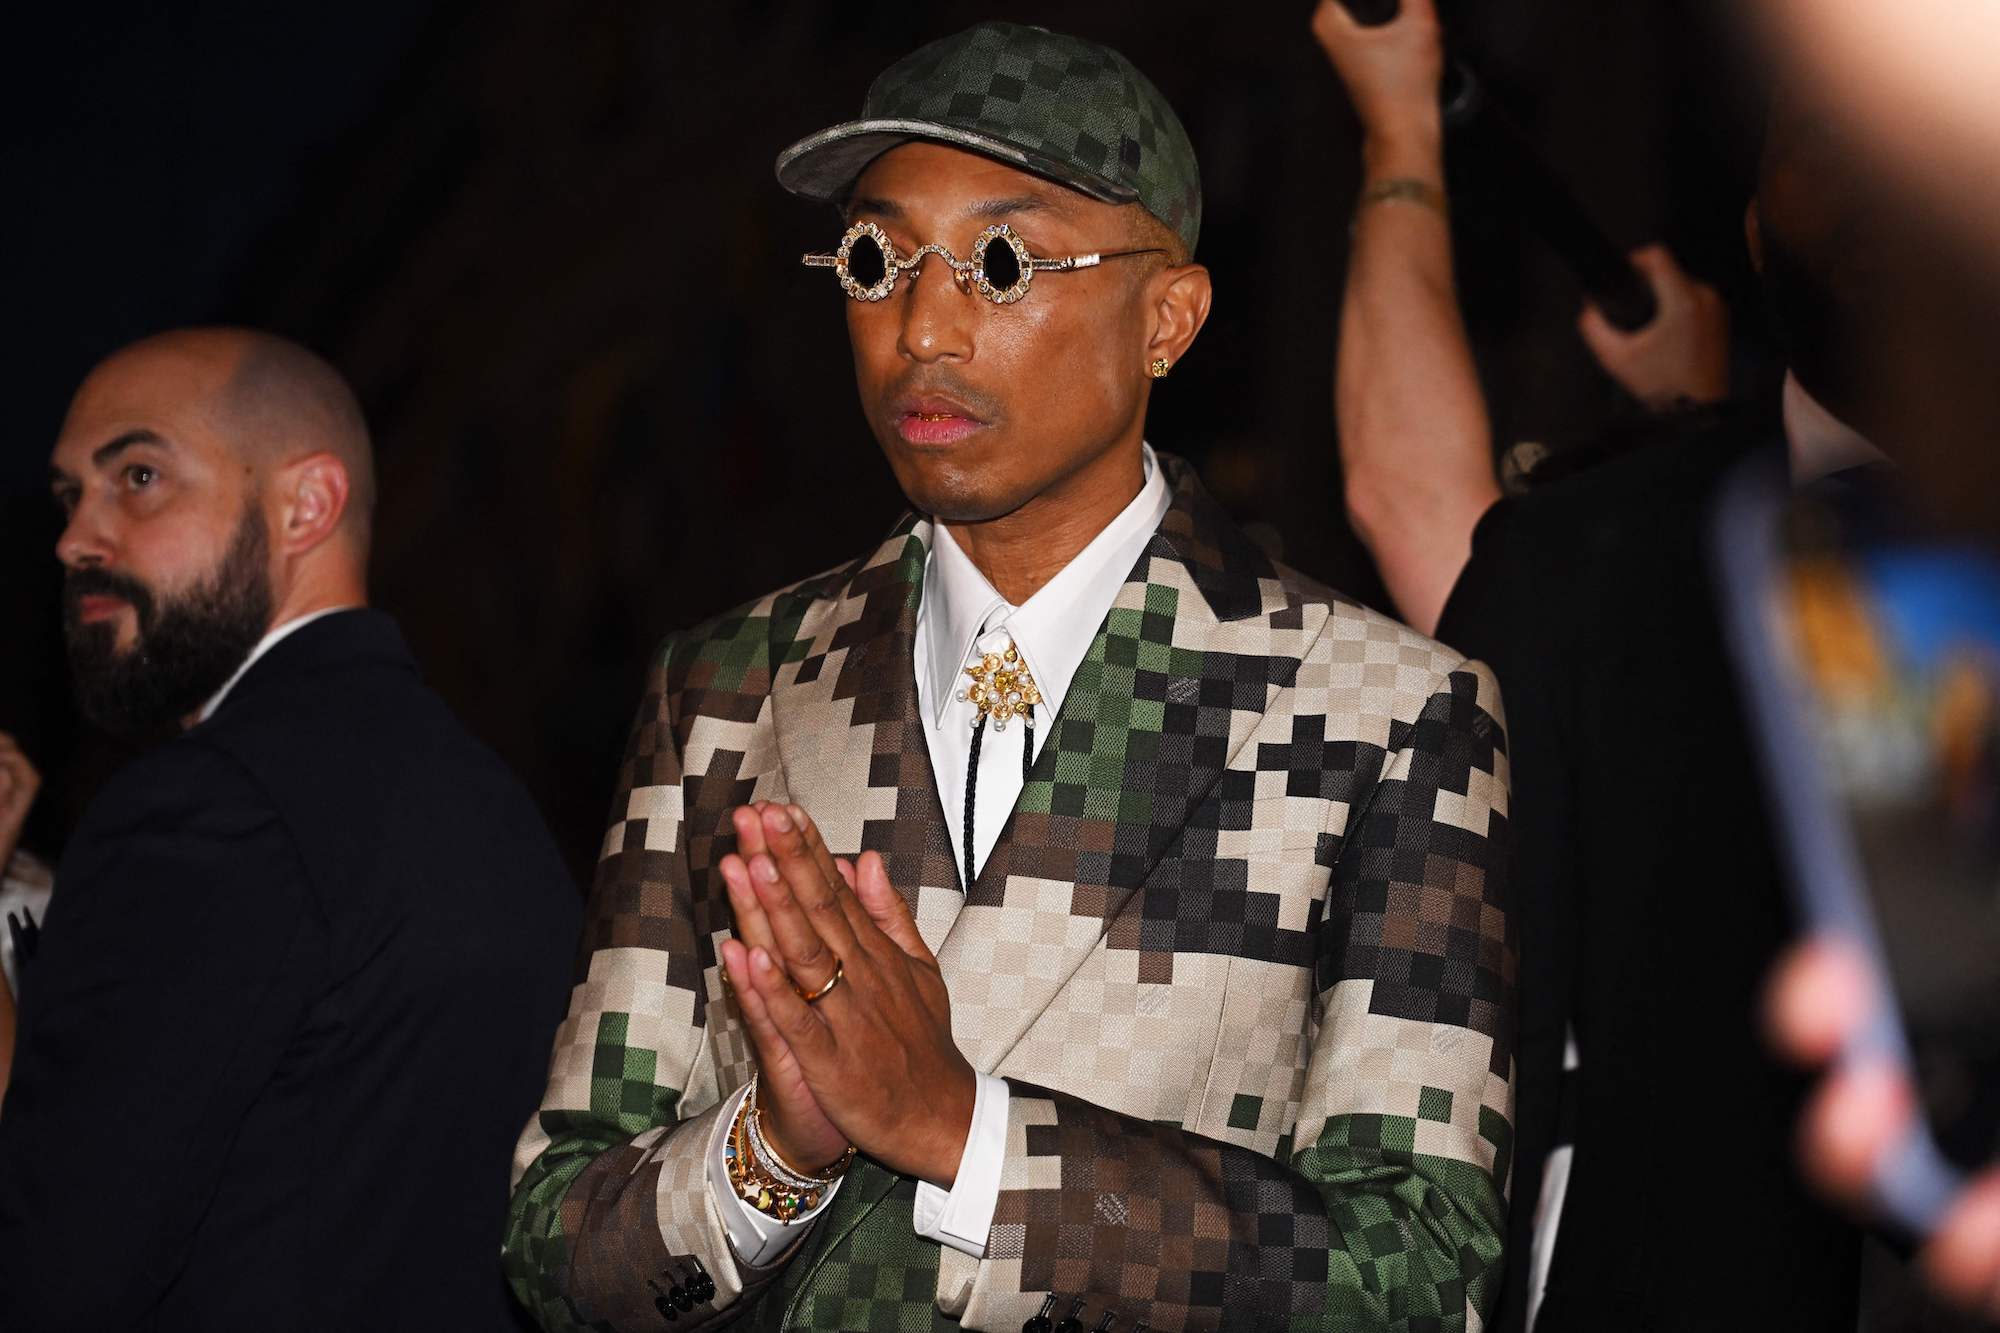 Reviewing Louis Vuitton's New Collection SS24 by Pharrell Williams